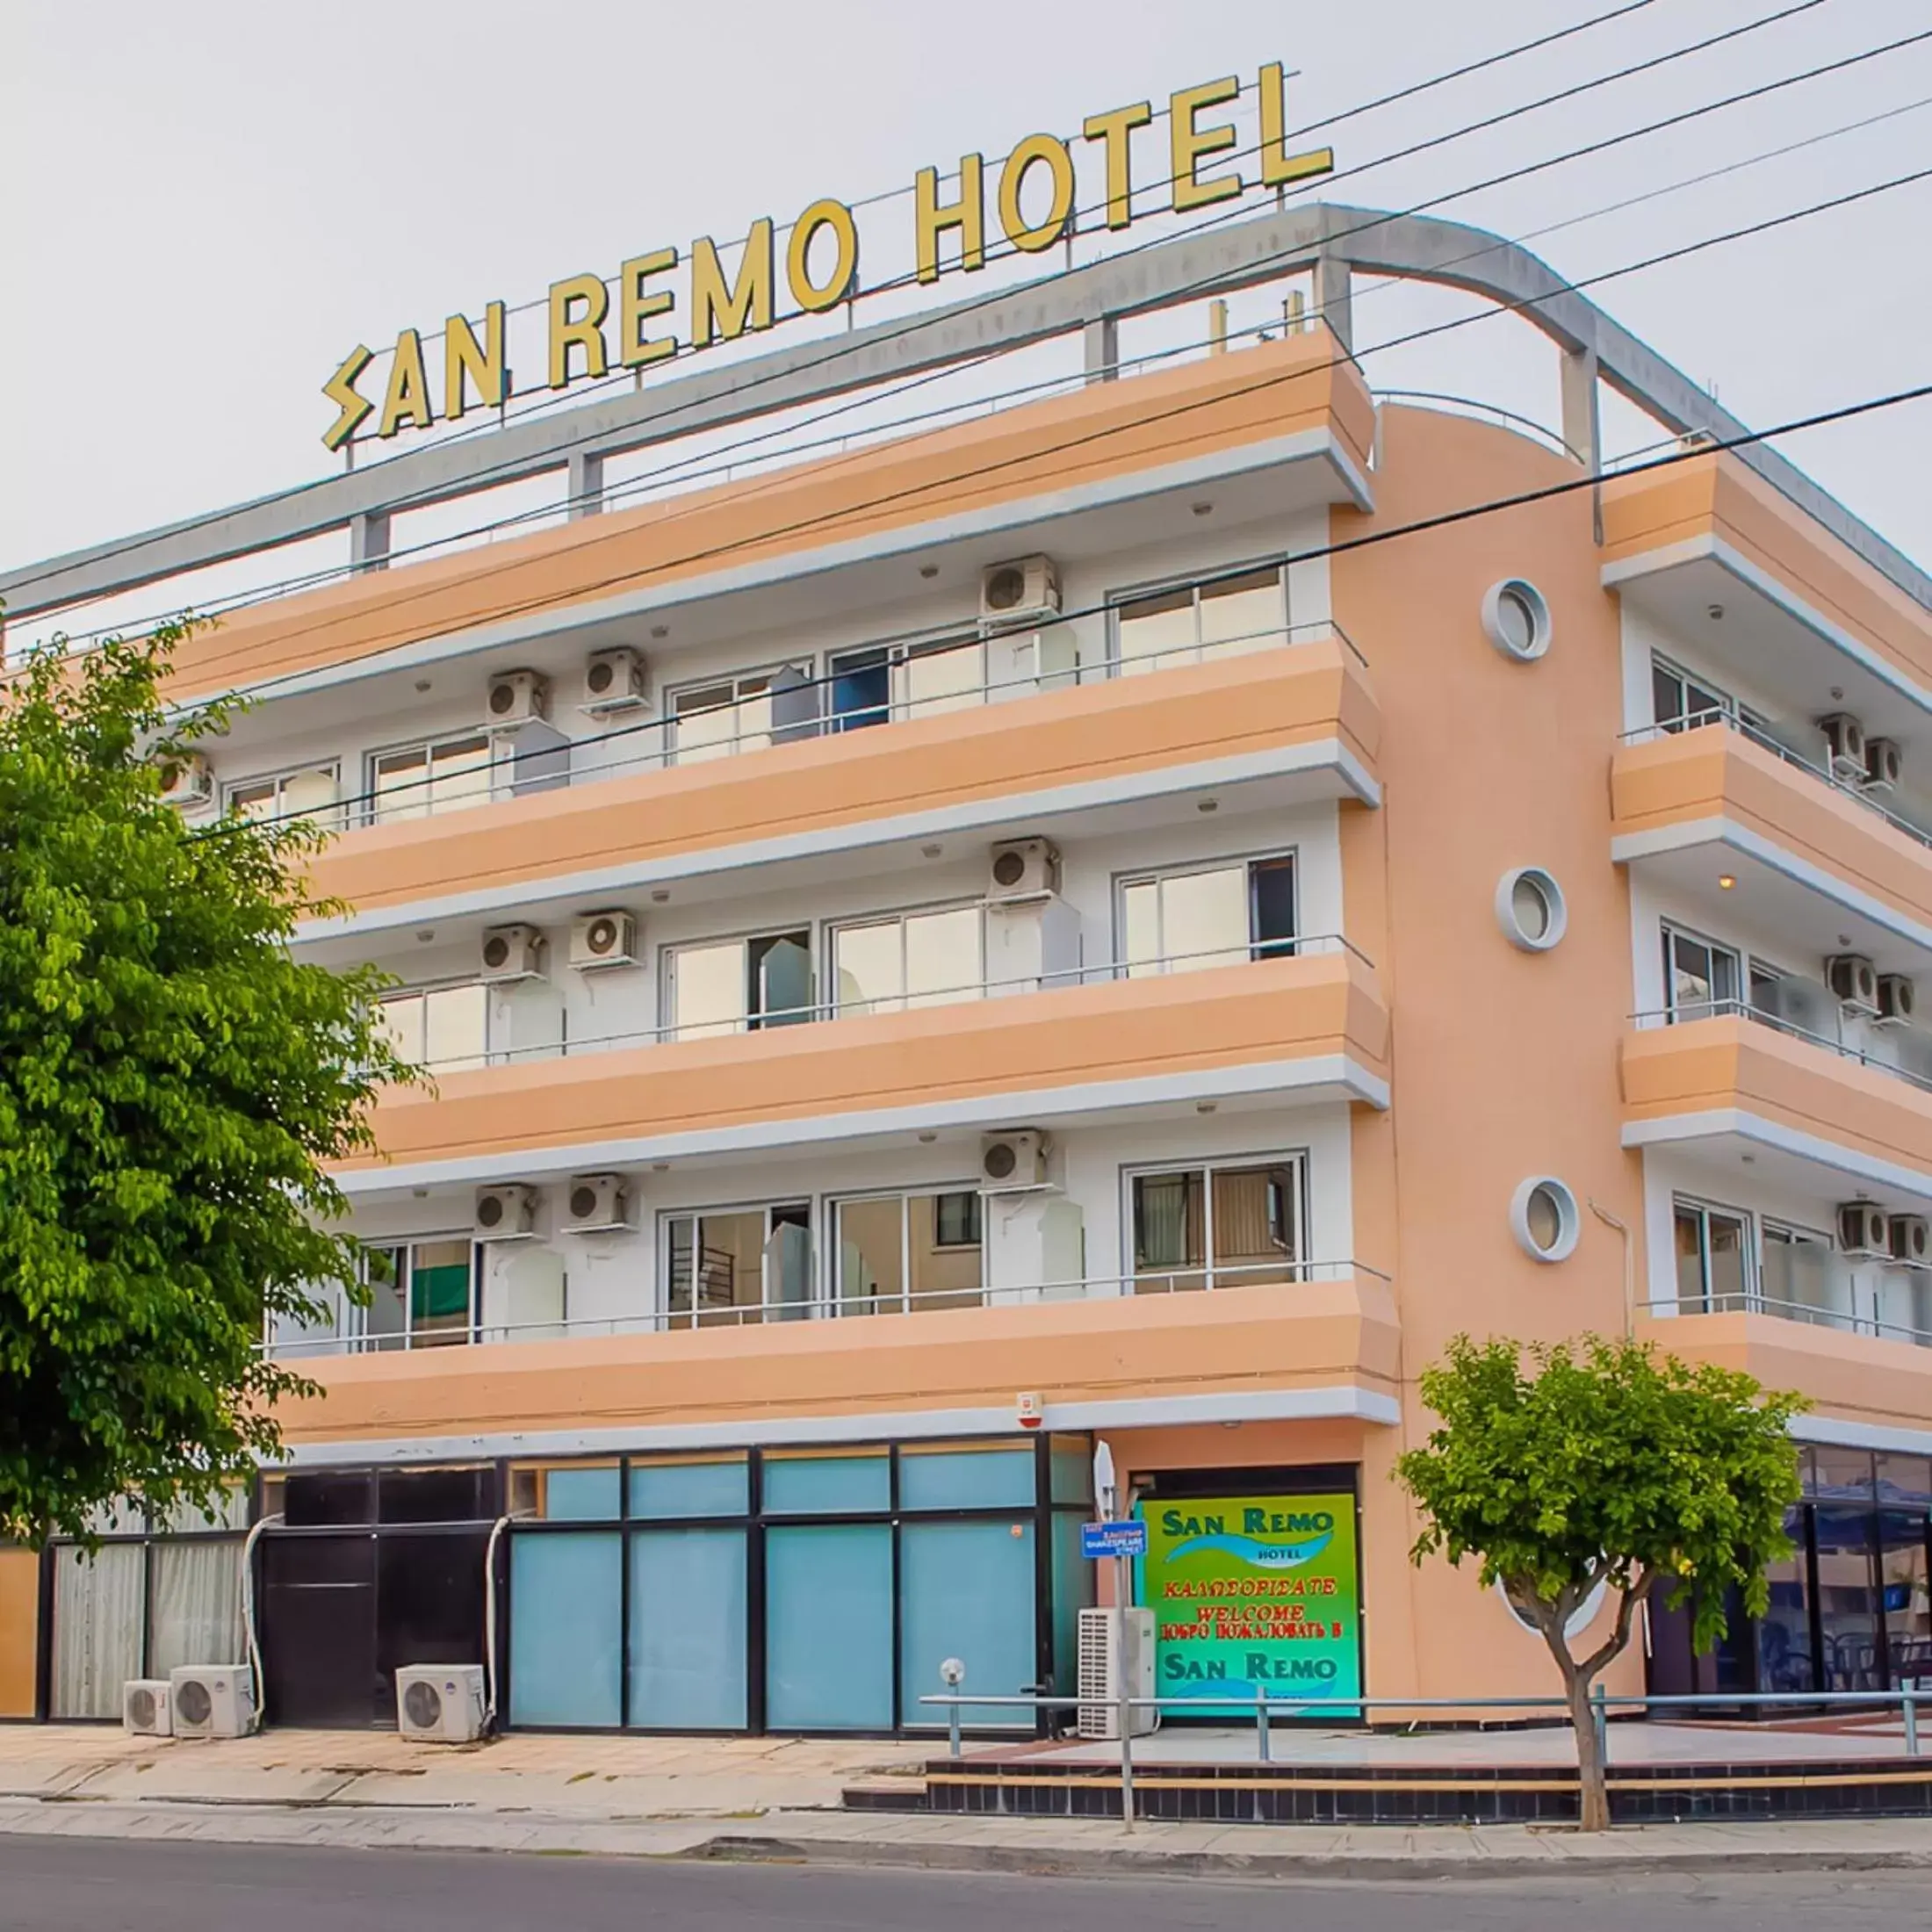 Property building in San Remo Hotel